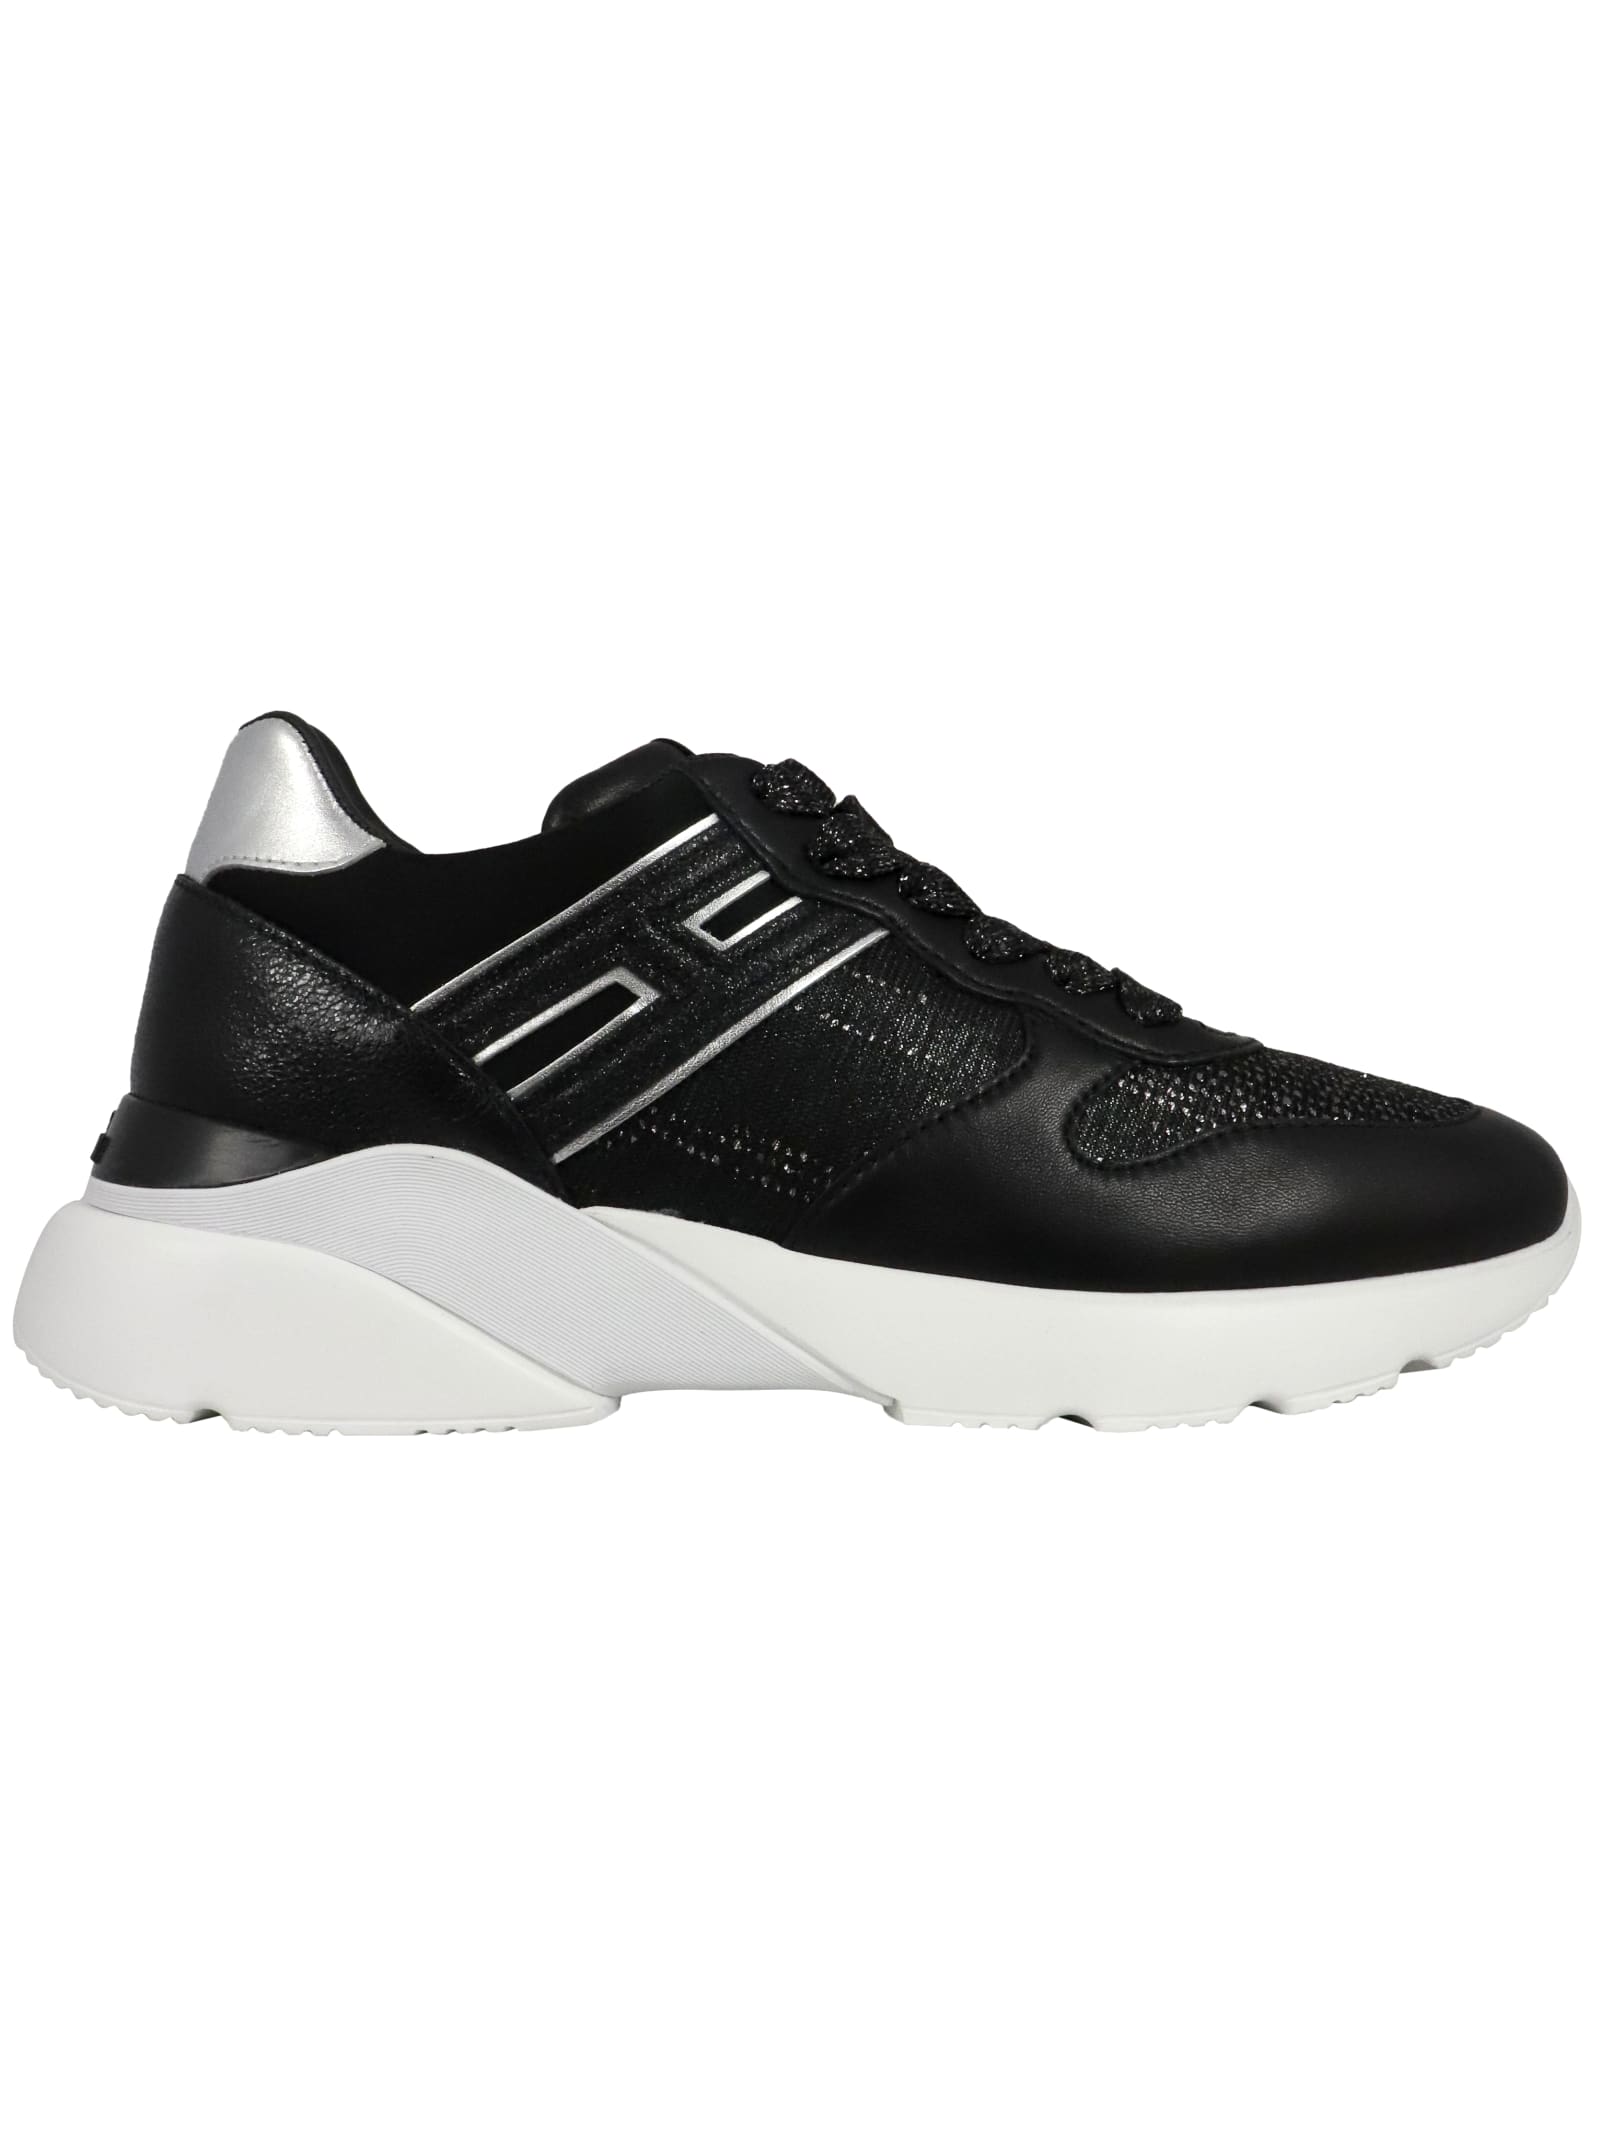 Hogan Active One Laced Shoe